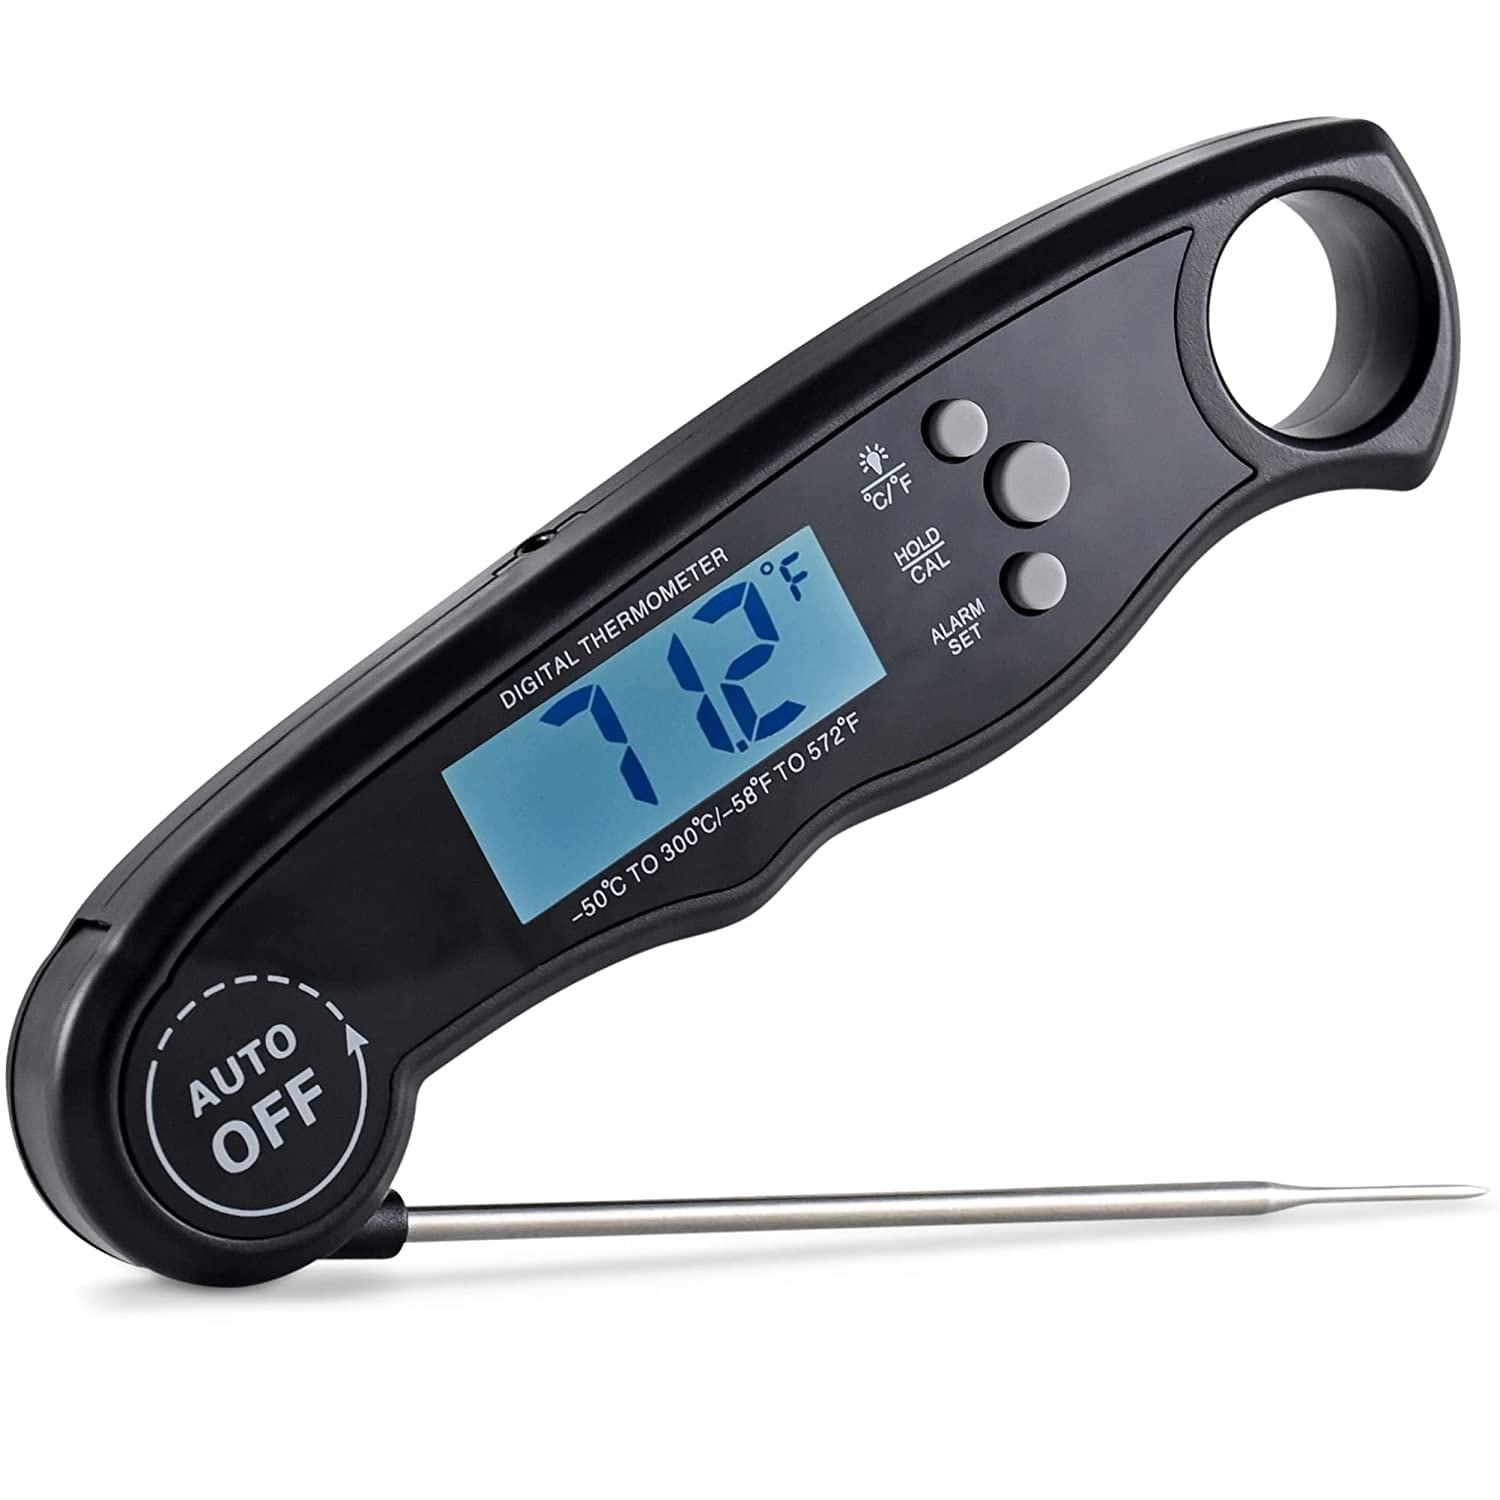 OXO Good Grips Chef's Precision Meat Thermometer, Silver